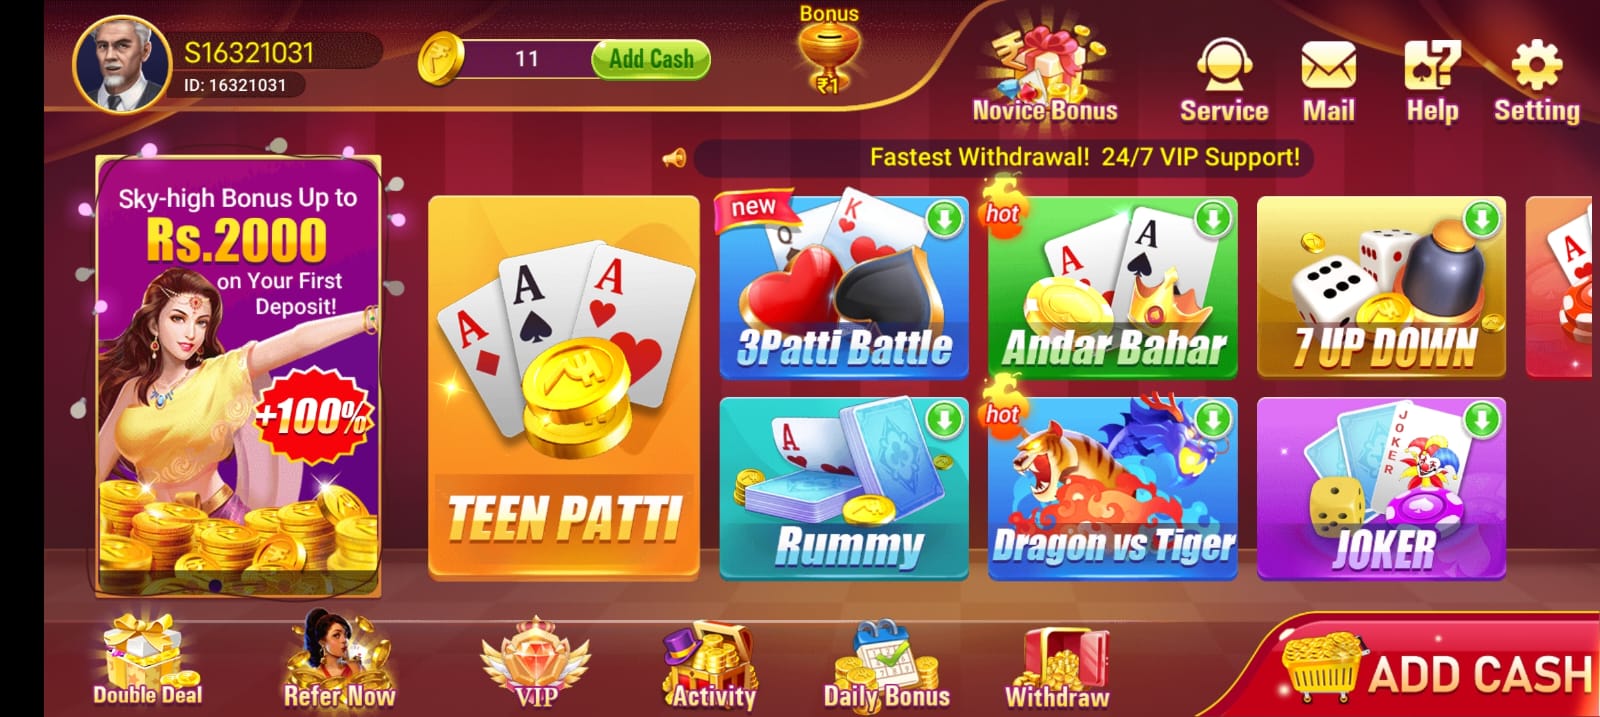 Available Games on Rummy Paisoo App